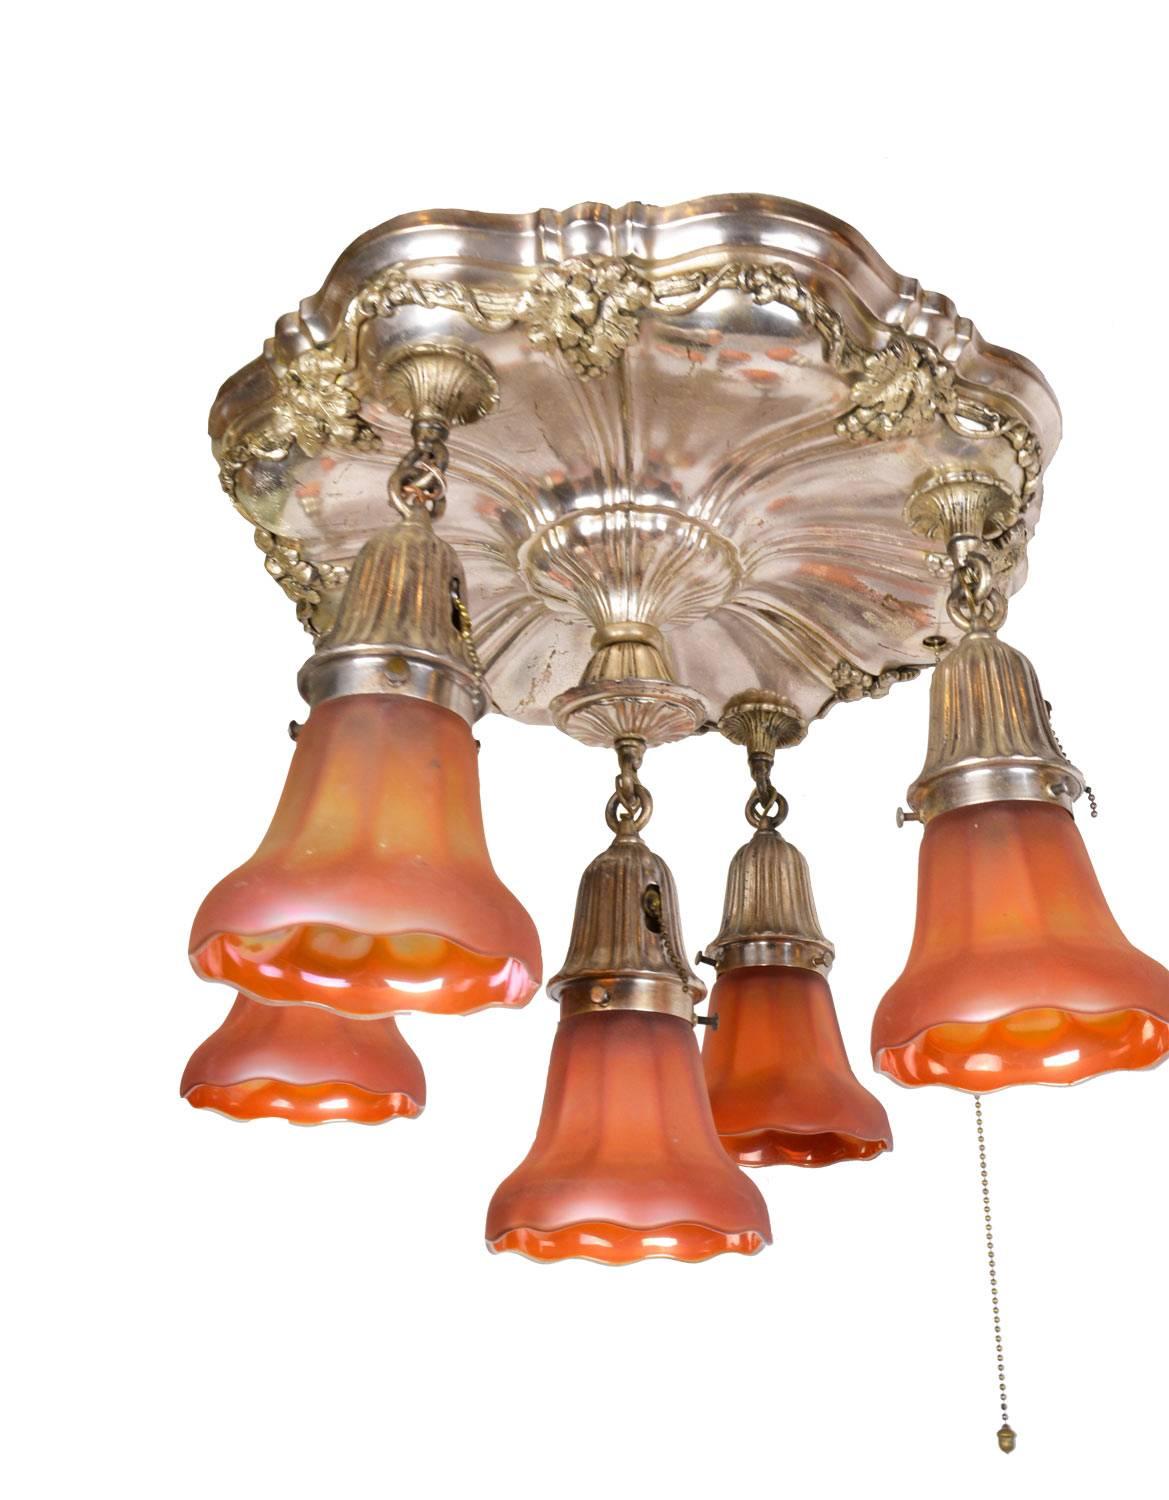 American Stunning Silver Plated Five-Light Chandelier with Carnival Glass Shades